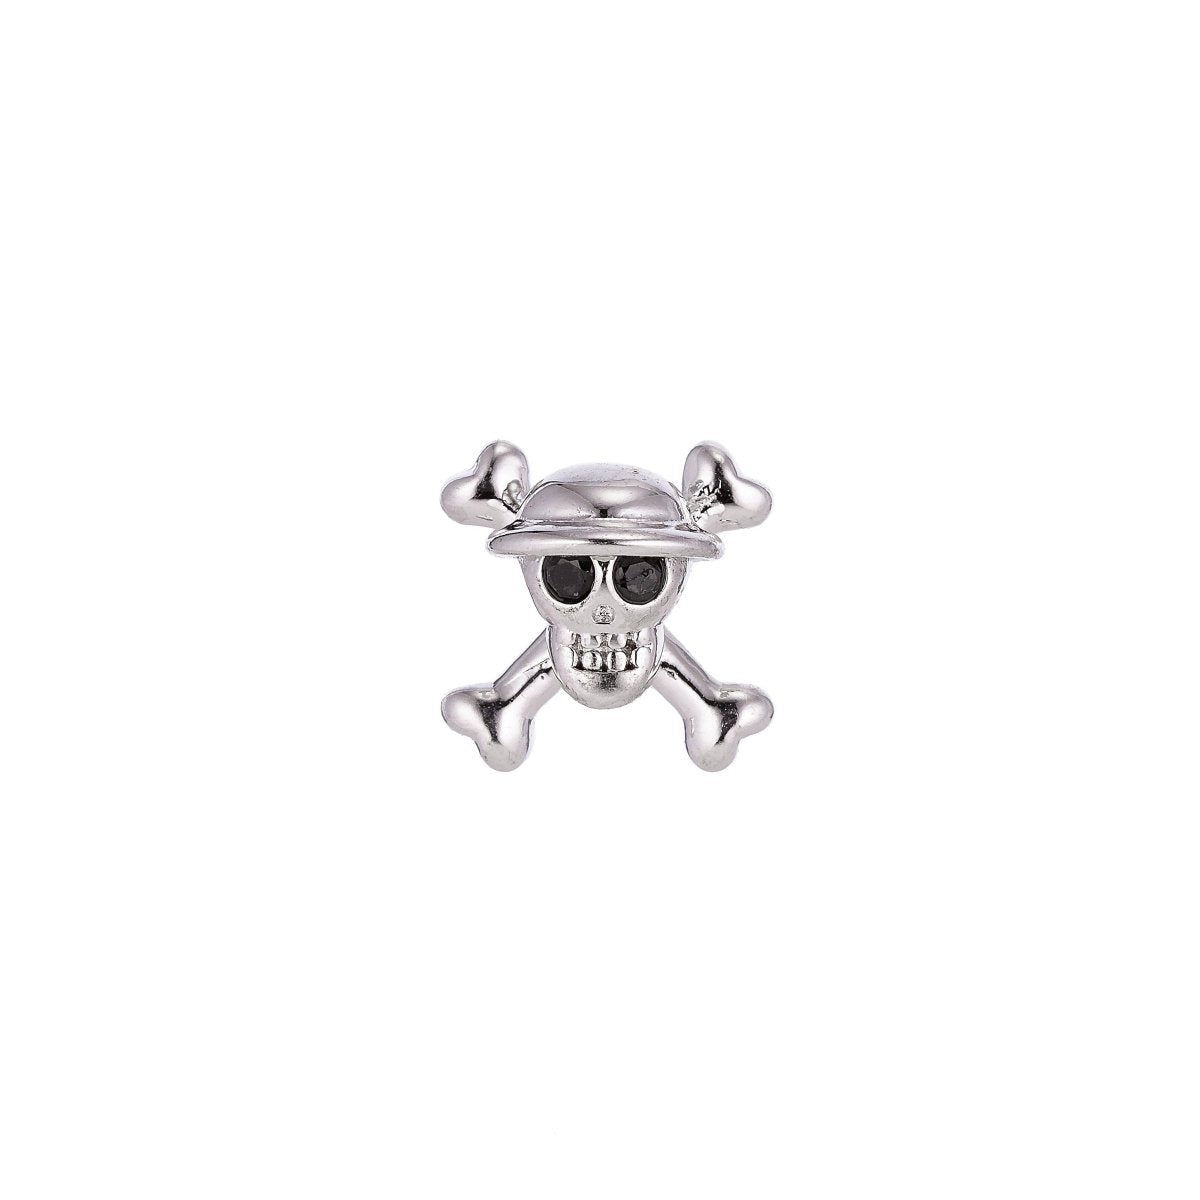 On Sale! CLEARANCE! One Piece Pirate Skull Bead Spacer for Men Bracelet Silver Danger Warning Poison Skull and Crossbones Charm Connector 13x13mm | B-021 - DLUXCA